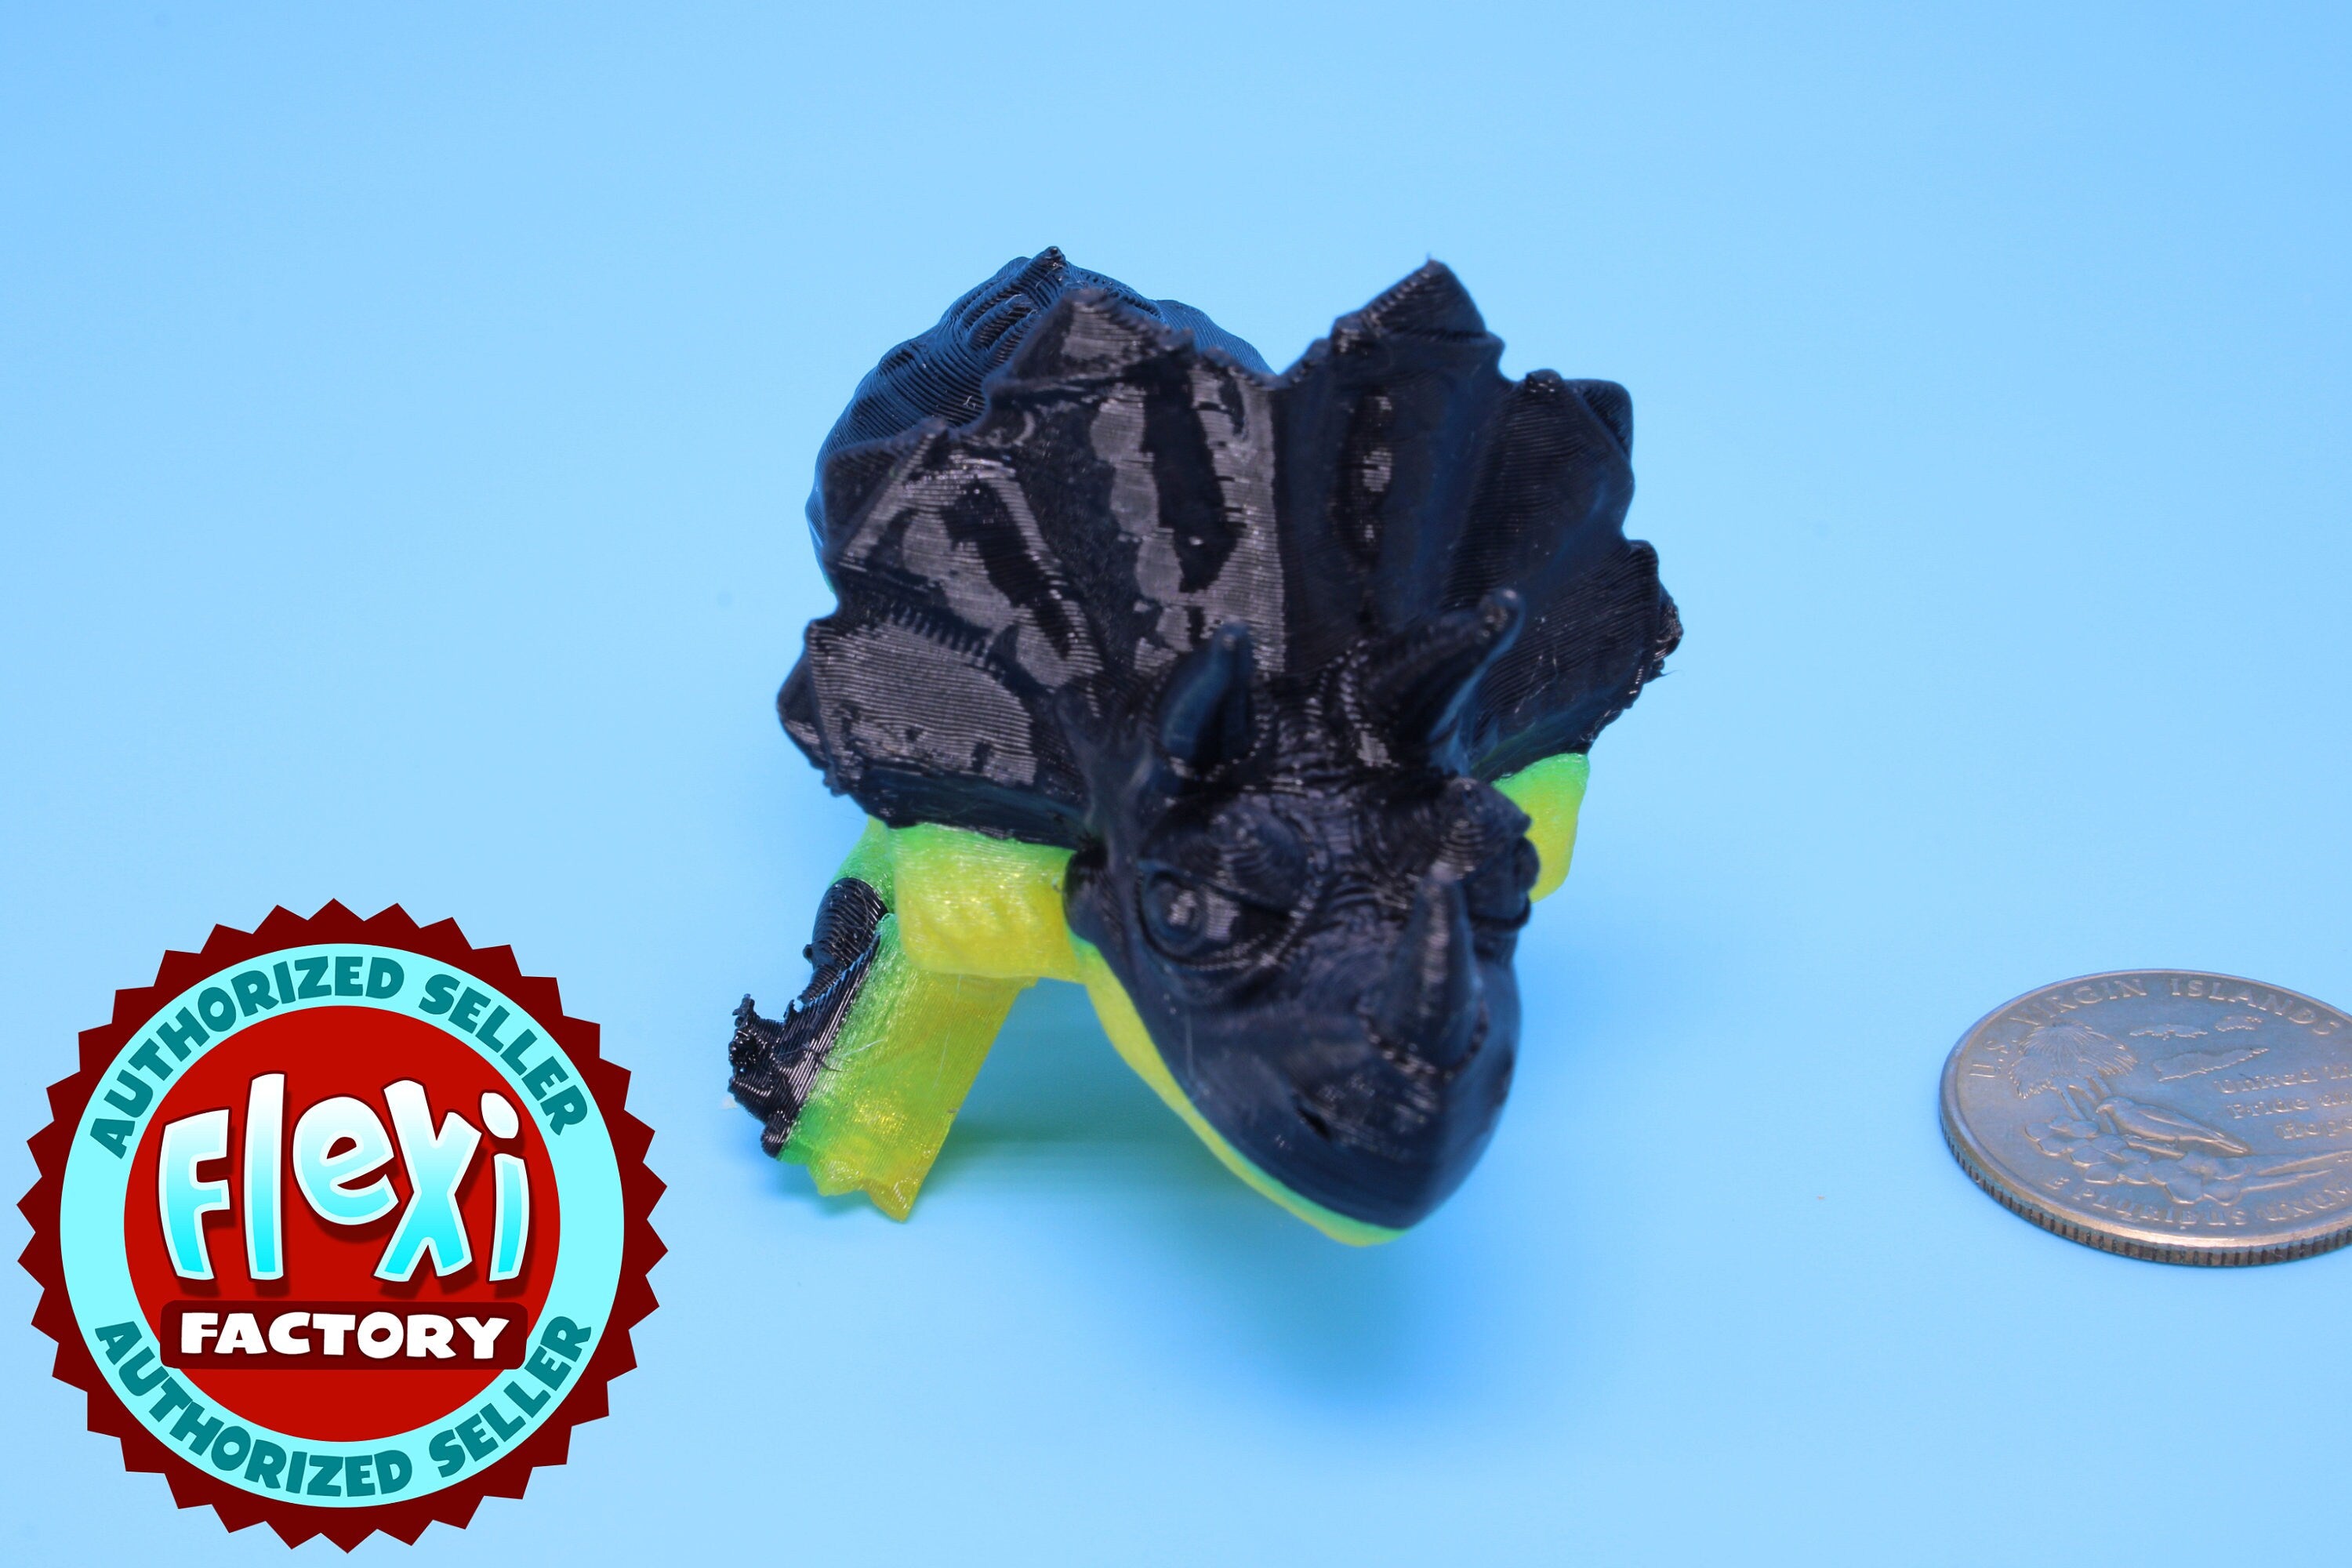 Miniature Triceratops- Black & Yellow | 3D Printed | Articulating Fidget toy | Sensory Toy | 4 in.